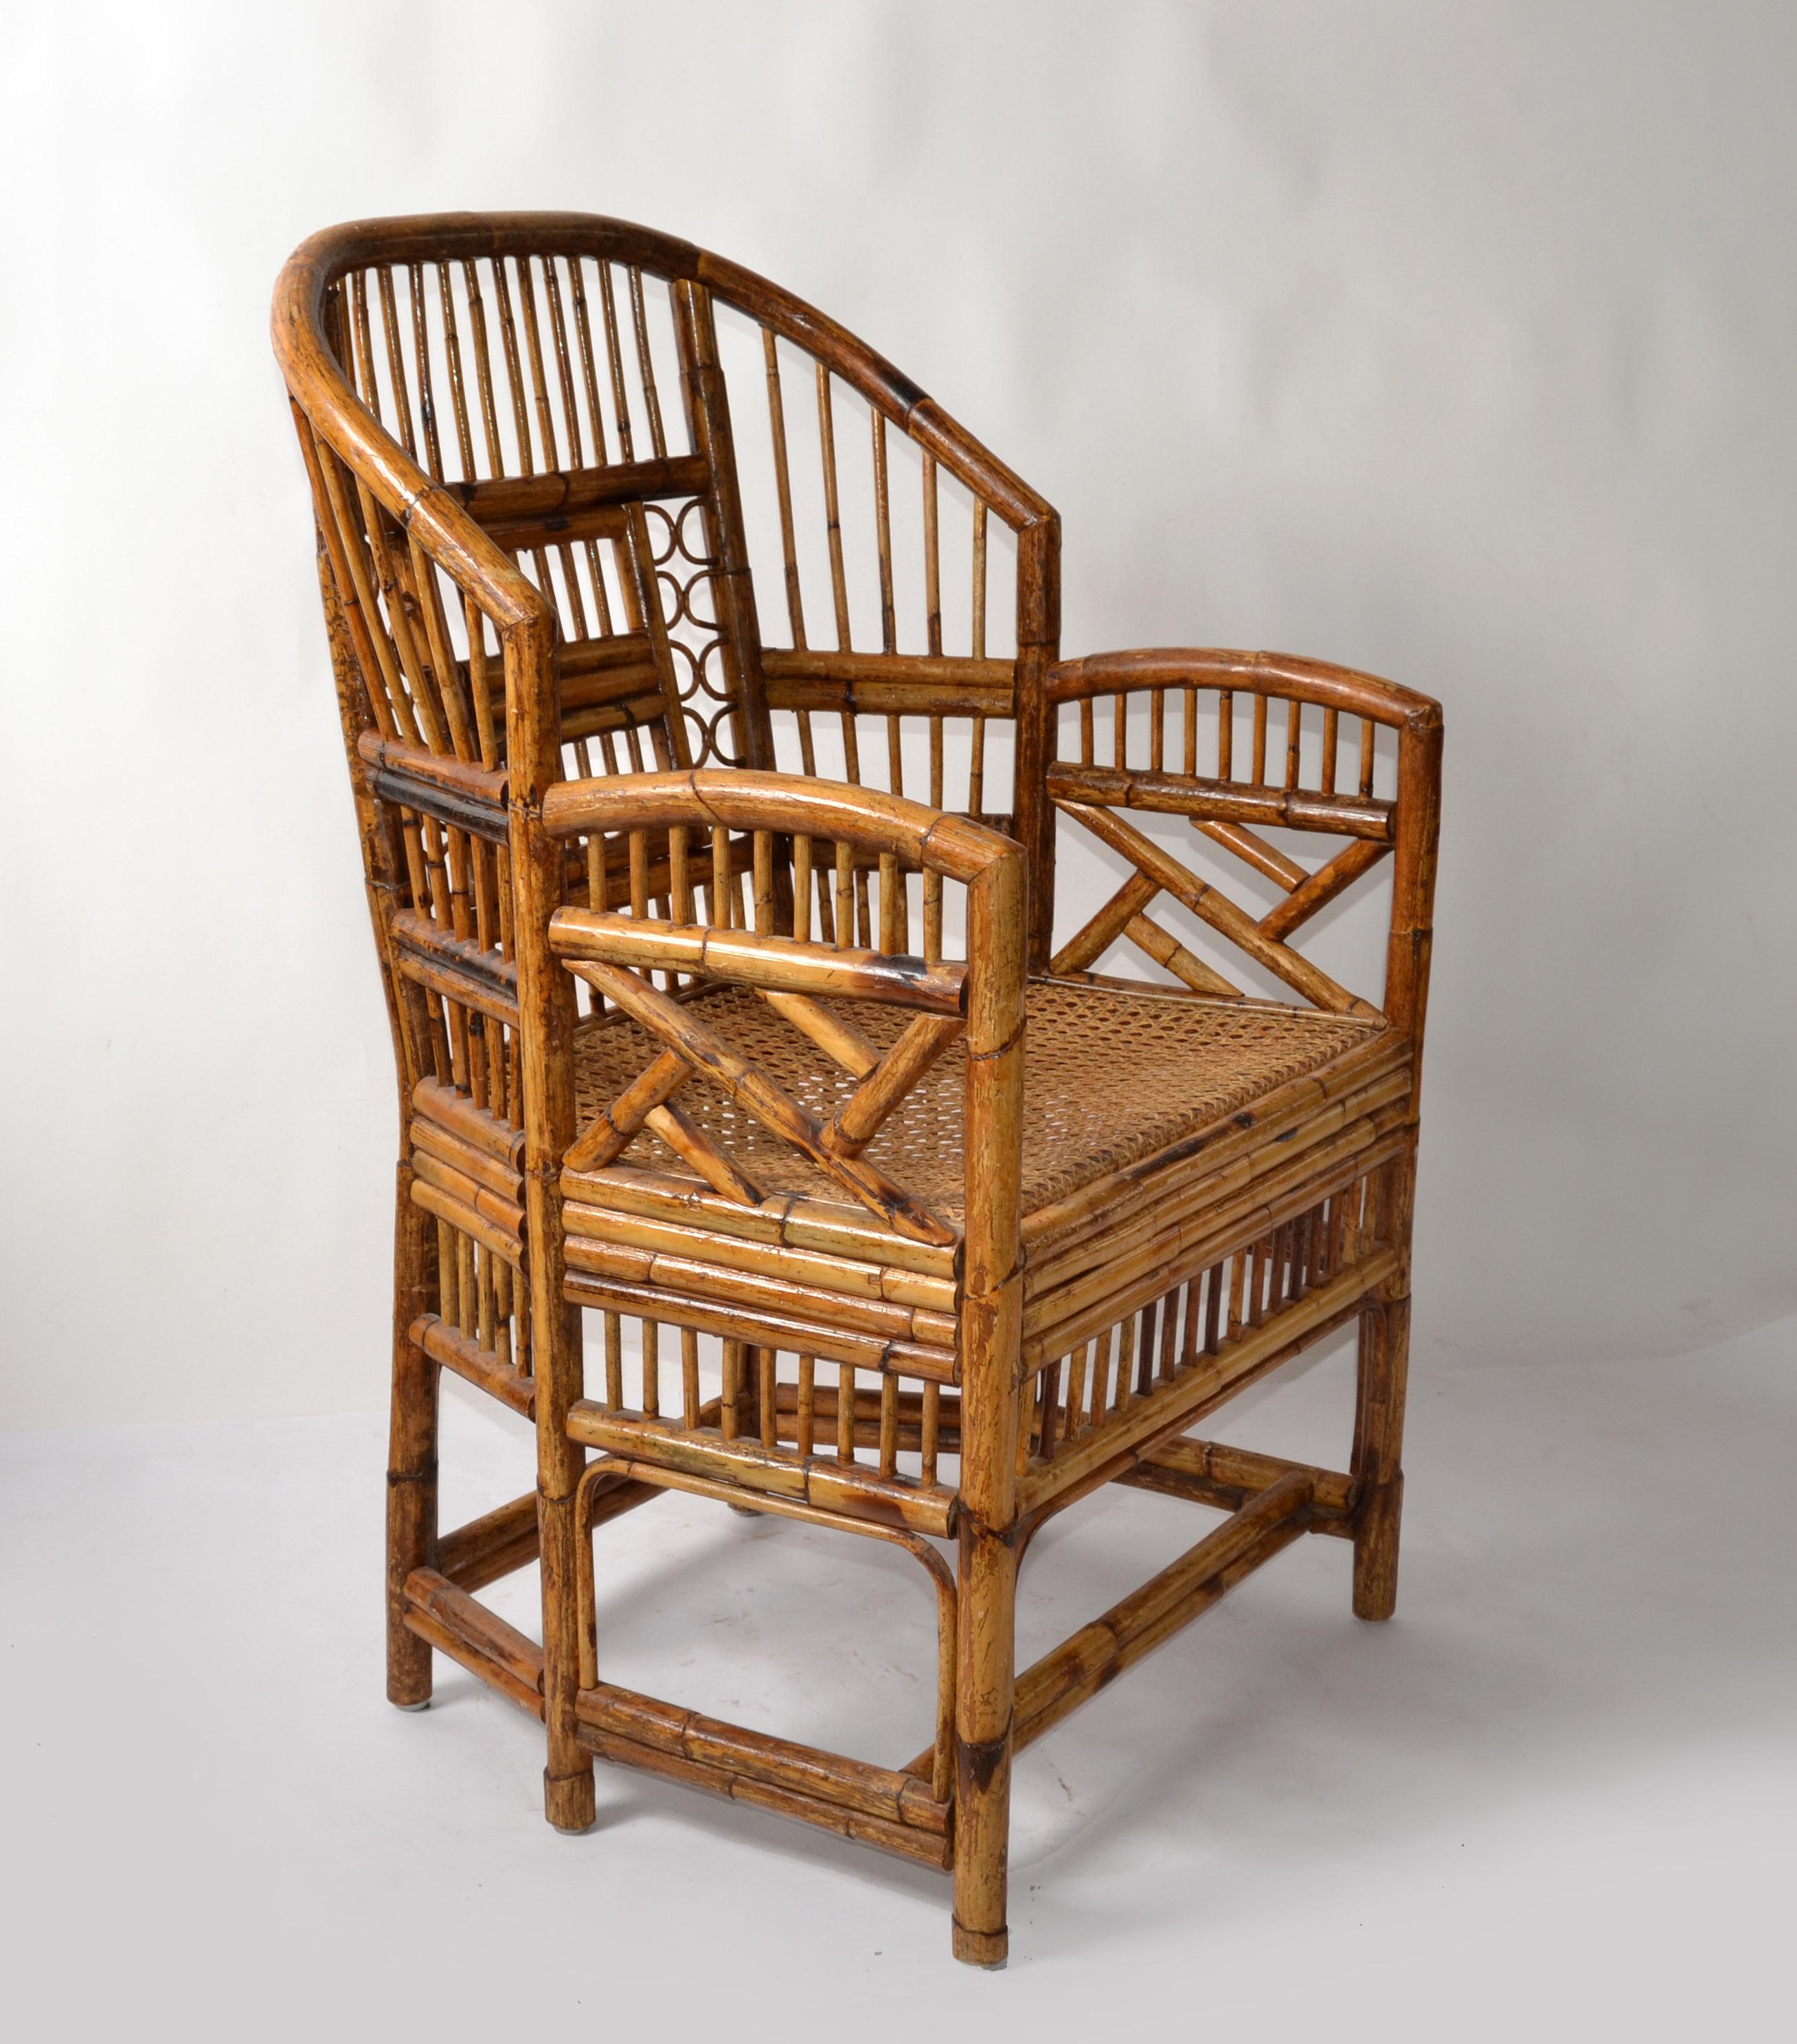 Vintage burnt bamboo, caning and split reed armchair on six legs. This is a handcrafted chair with woven cane seat features bamboo frames and Chinese inspired bamboo patterns.
The backrests are designed with an extraordinary pattern as shown in the